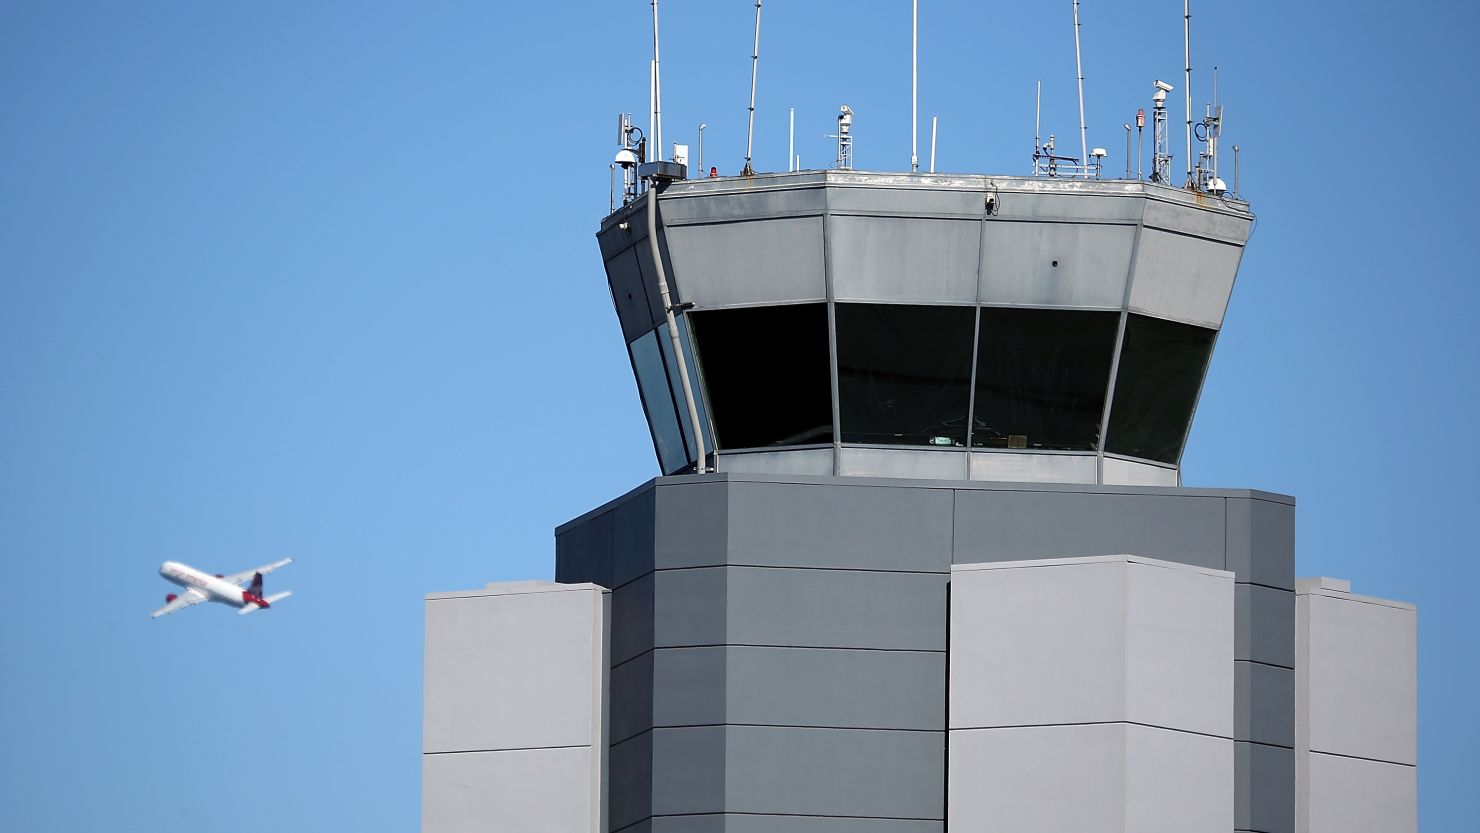 The FAA reports aircraft near misses more than doubled last year, but tied the increase to stronger reporting.